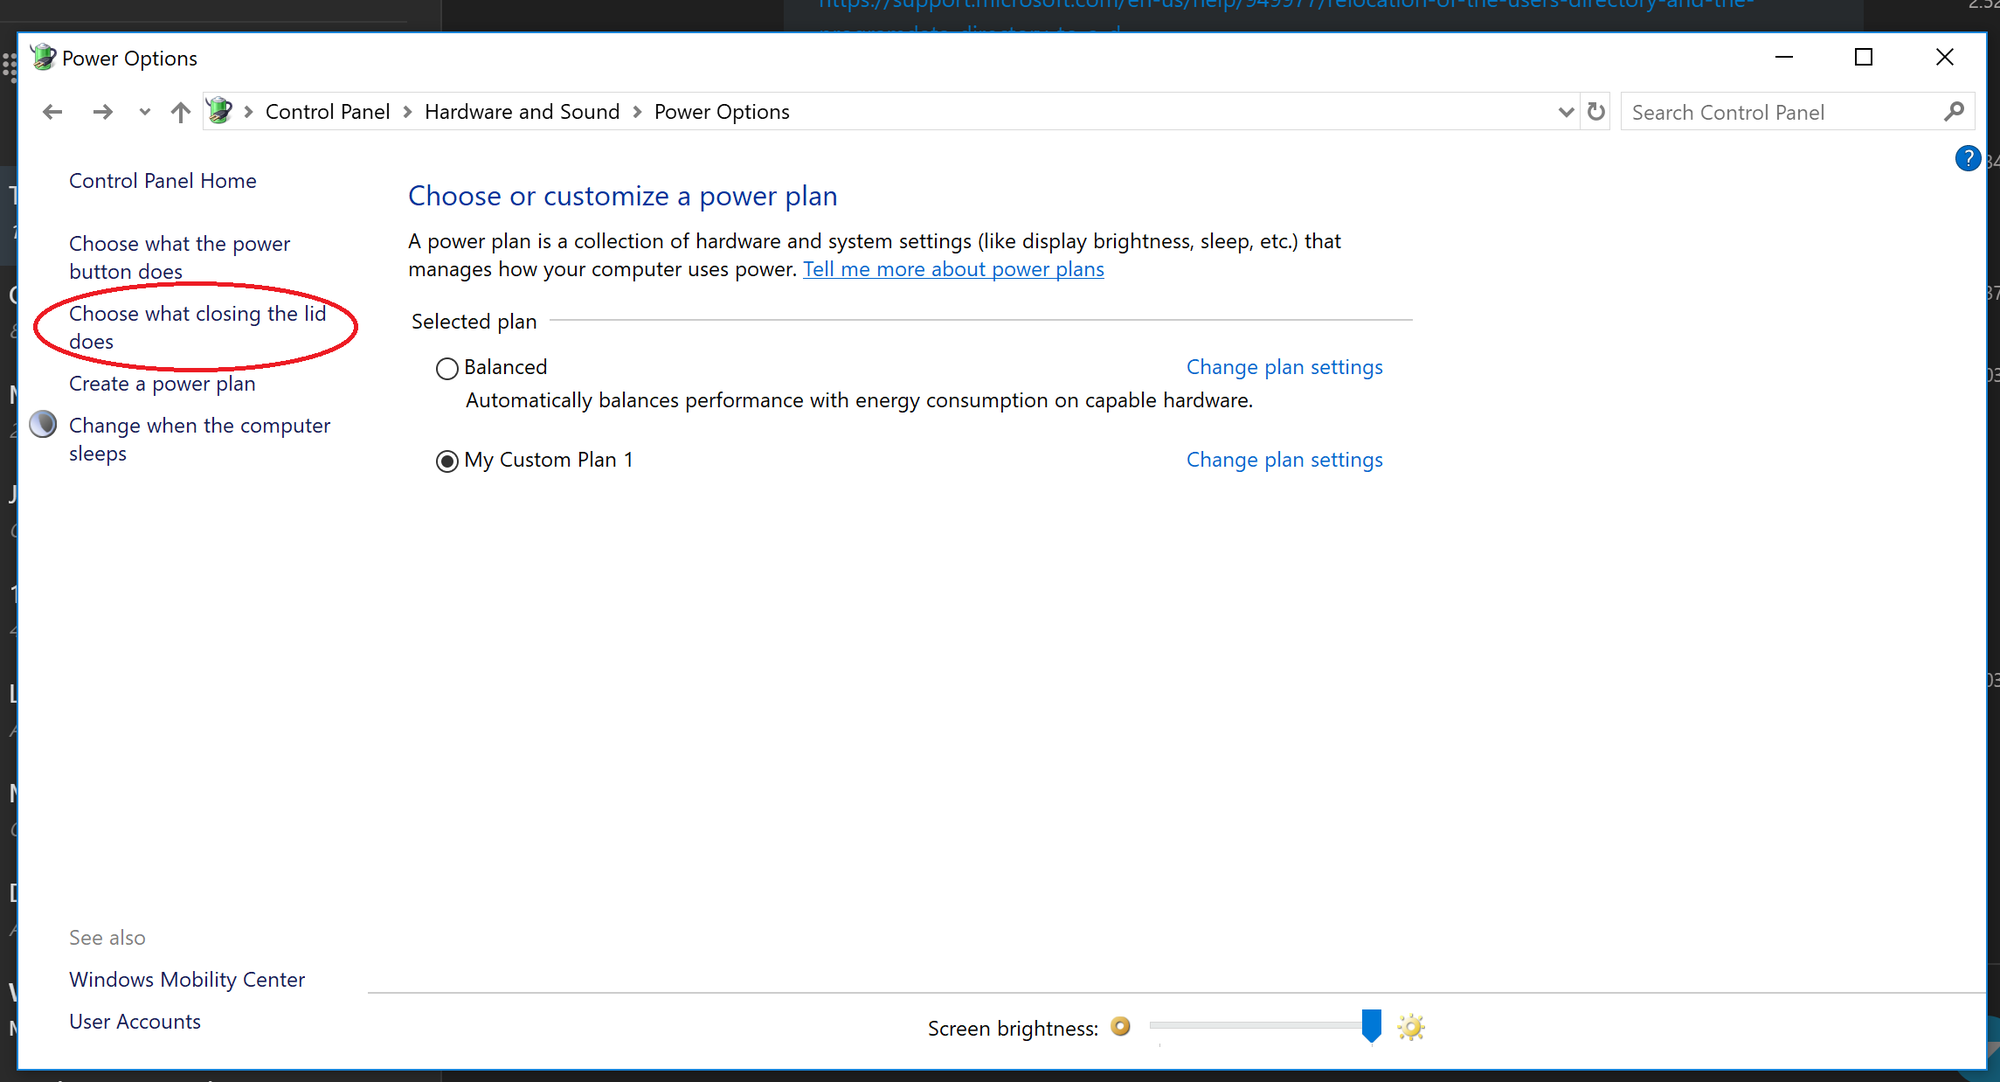 Windows 10 - Power Setting - Closing Lid / With Power Do Nothing - Doesn't work 23d6d67b-a3ef-4444-a076-00bf166b3471?upload=true.png